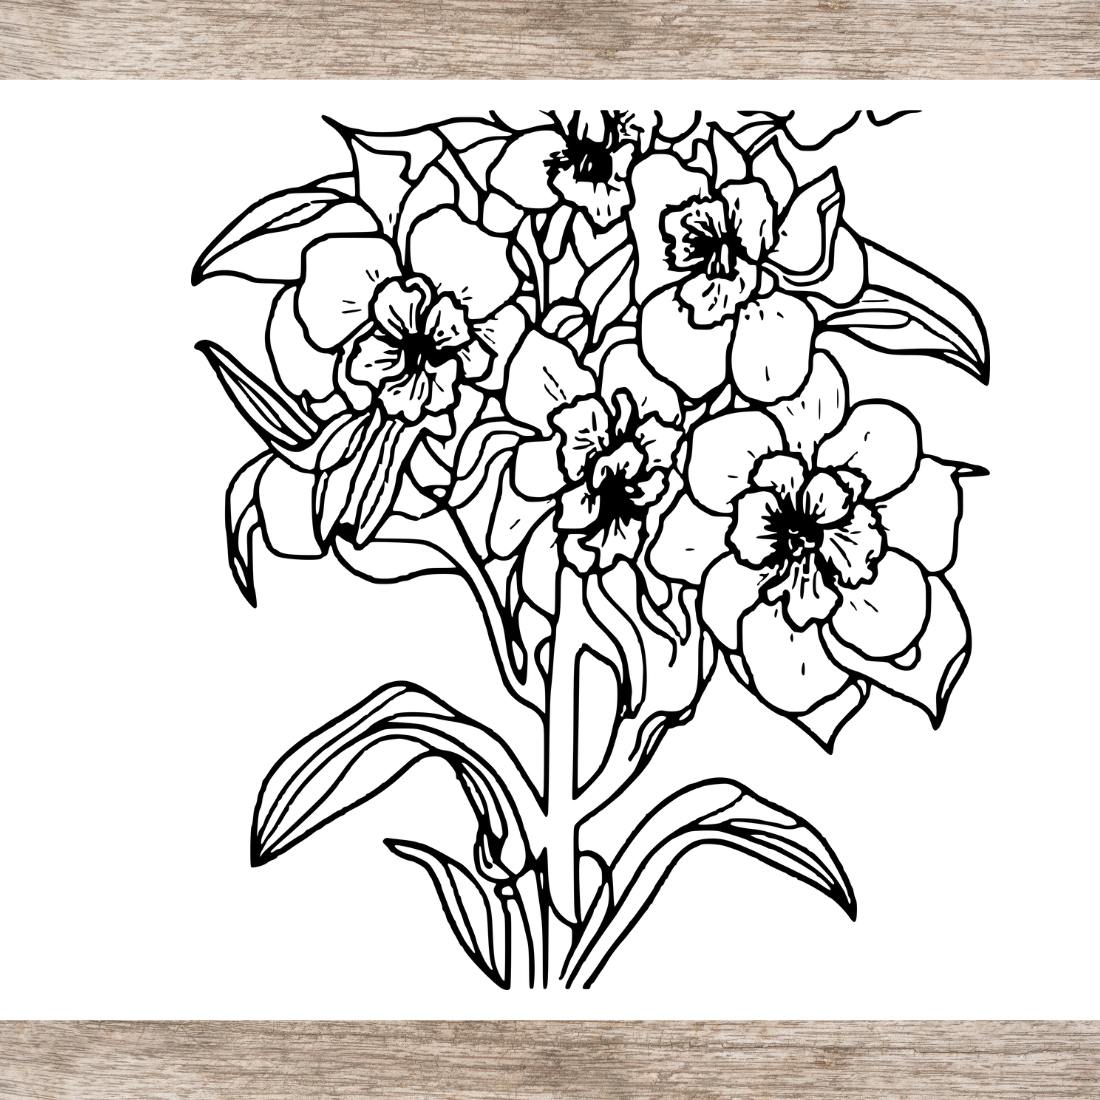 6 Flower Drawing Floral Coloring Pages bundle For Adults (SVG and PNG ) for KDP low content self-publishing preview image.